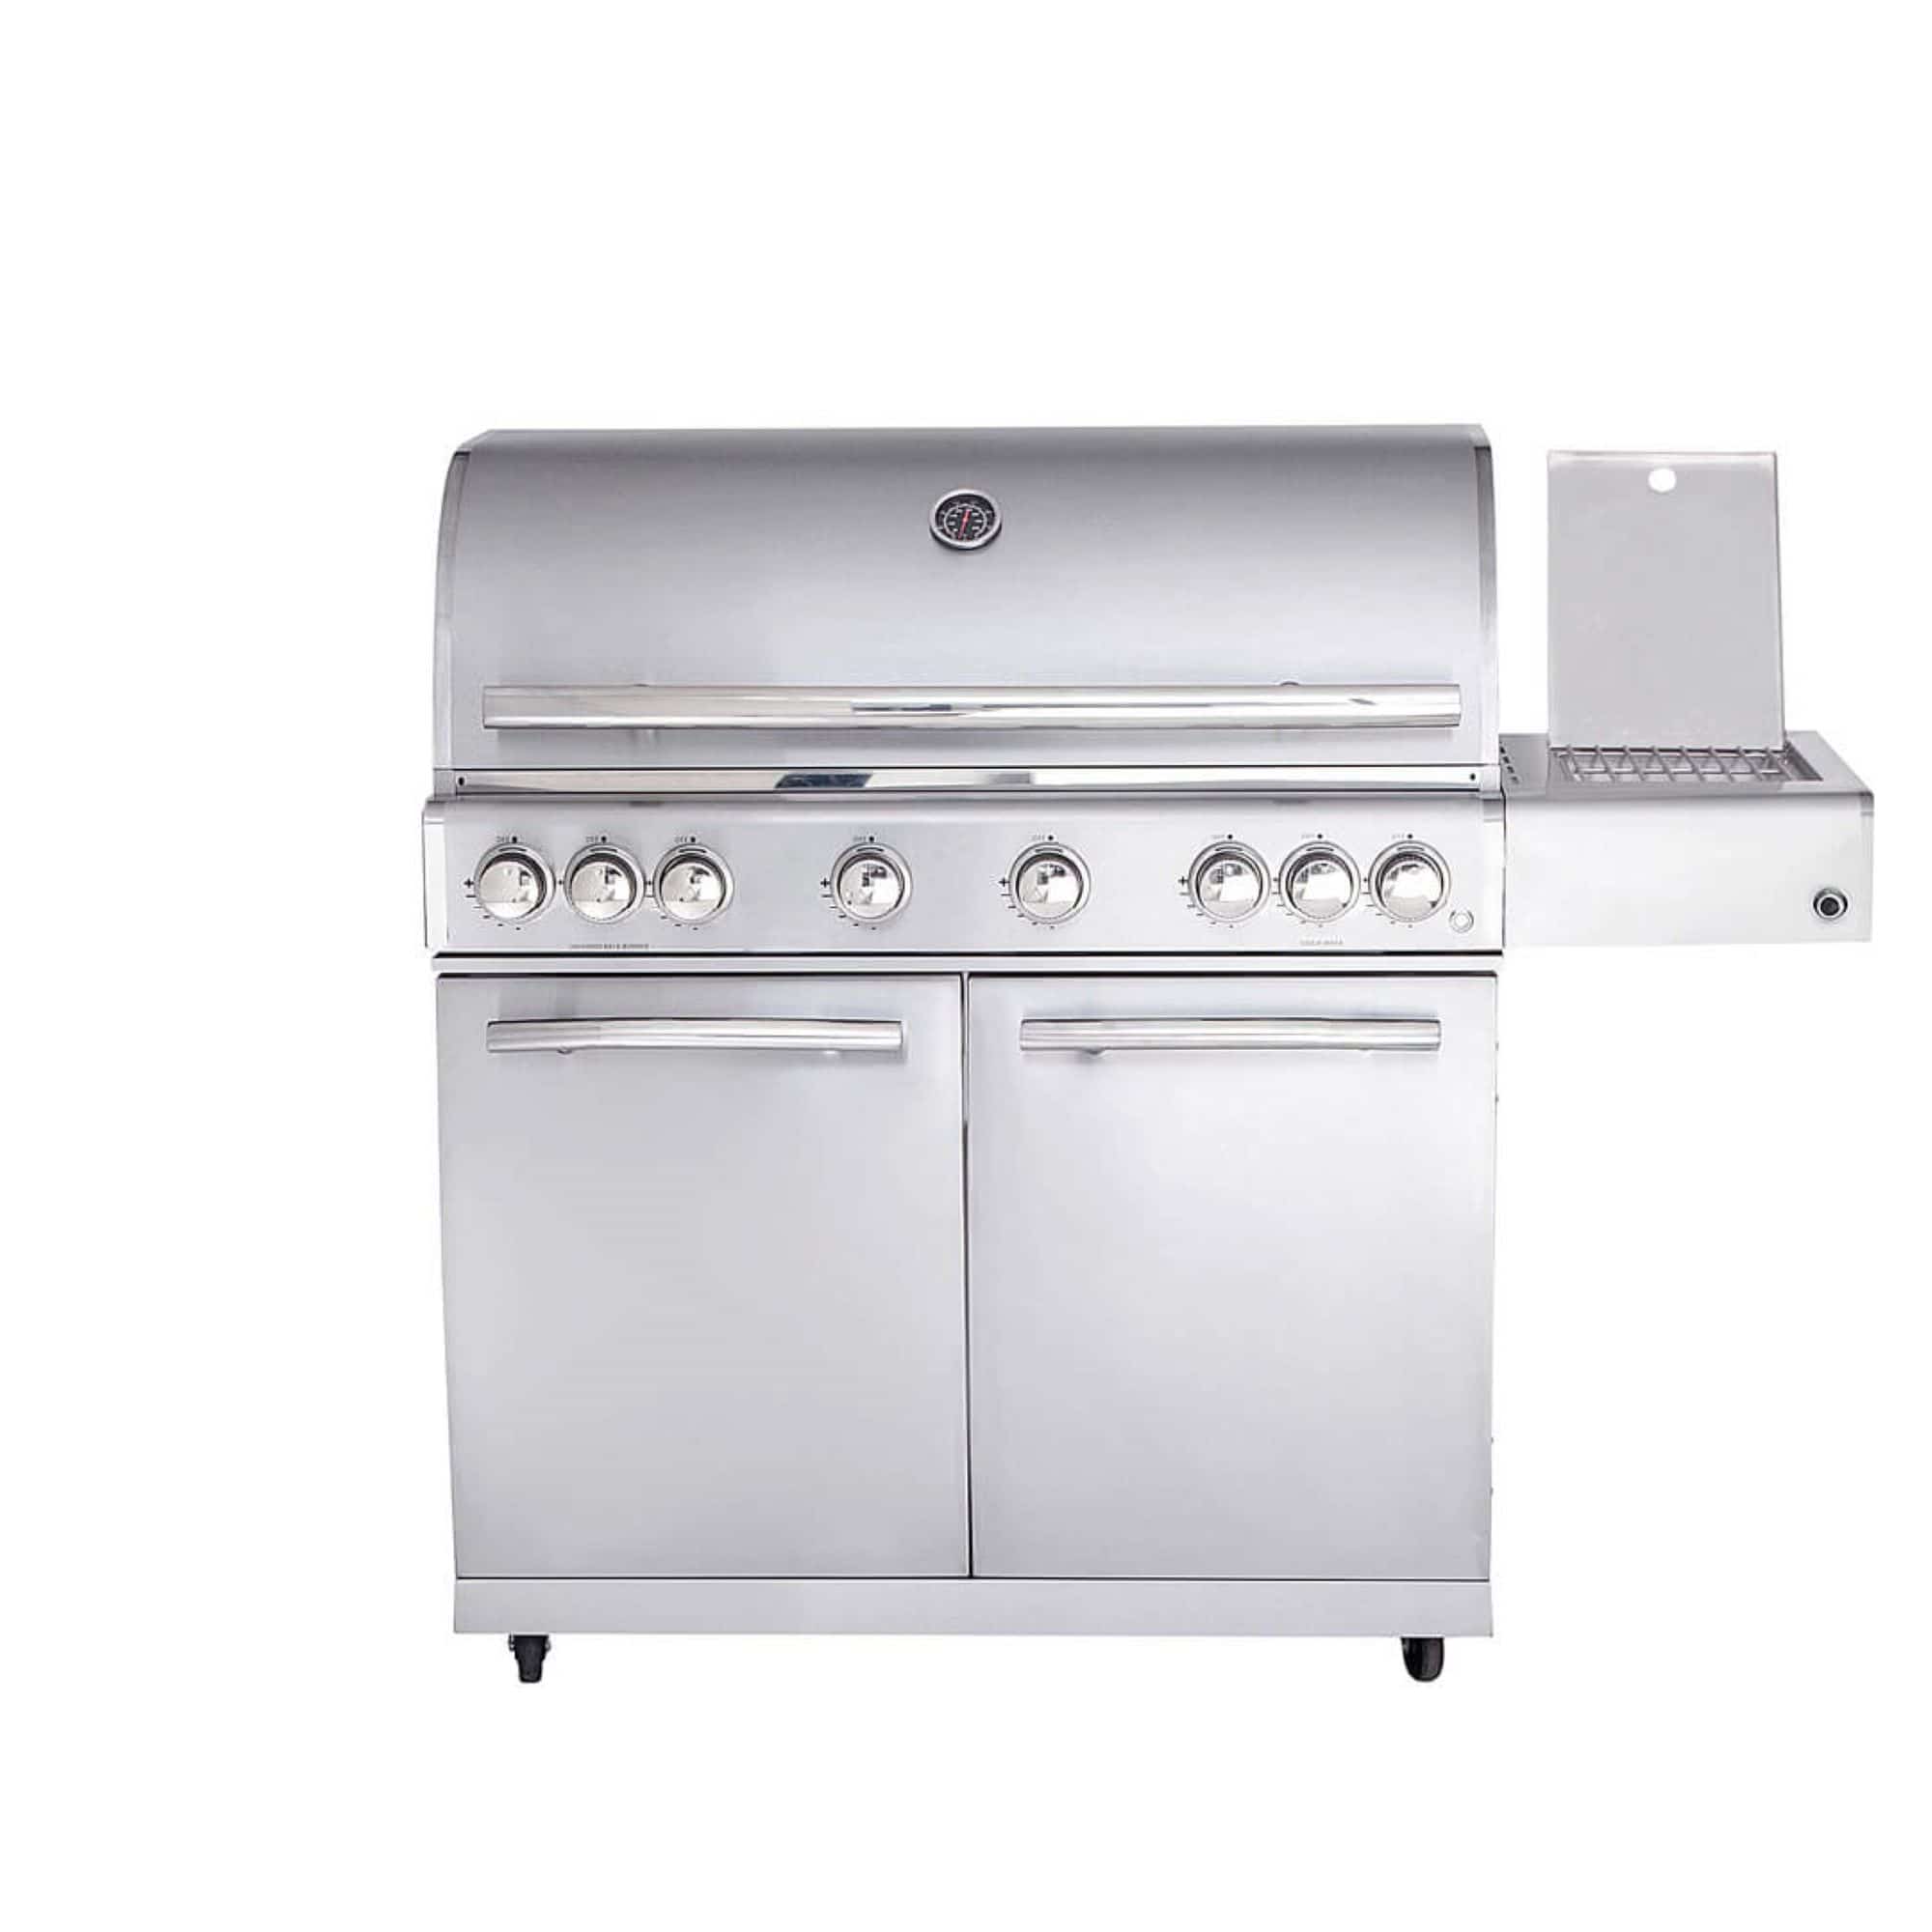 MODULAR-TOP-LINE-ALL'GRILL CHEF XL